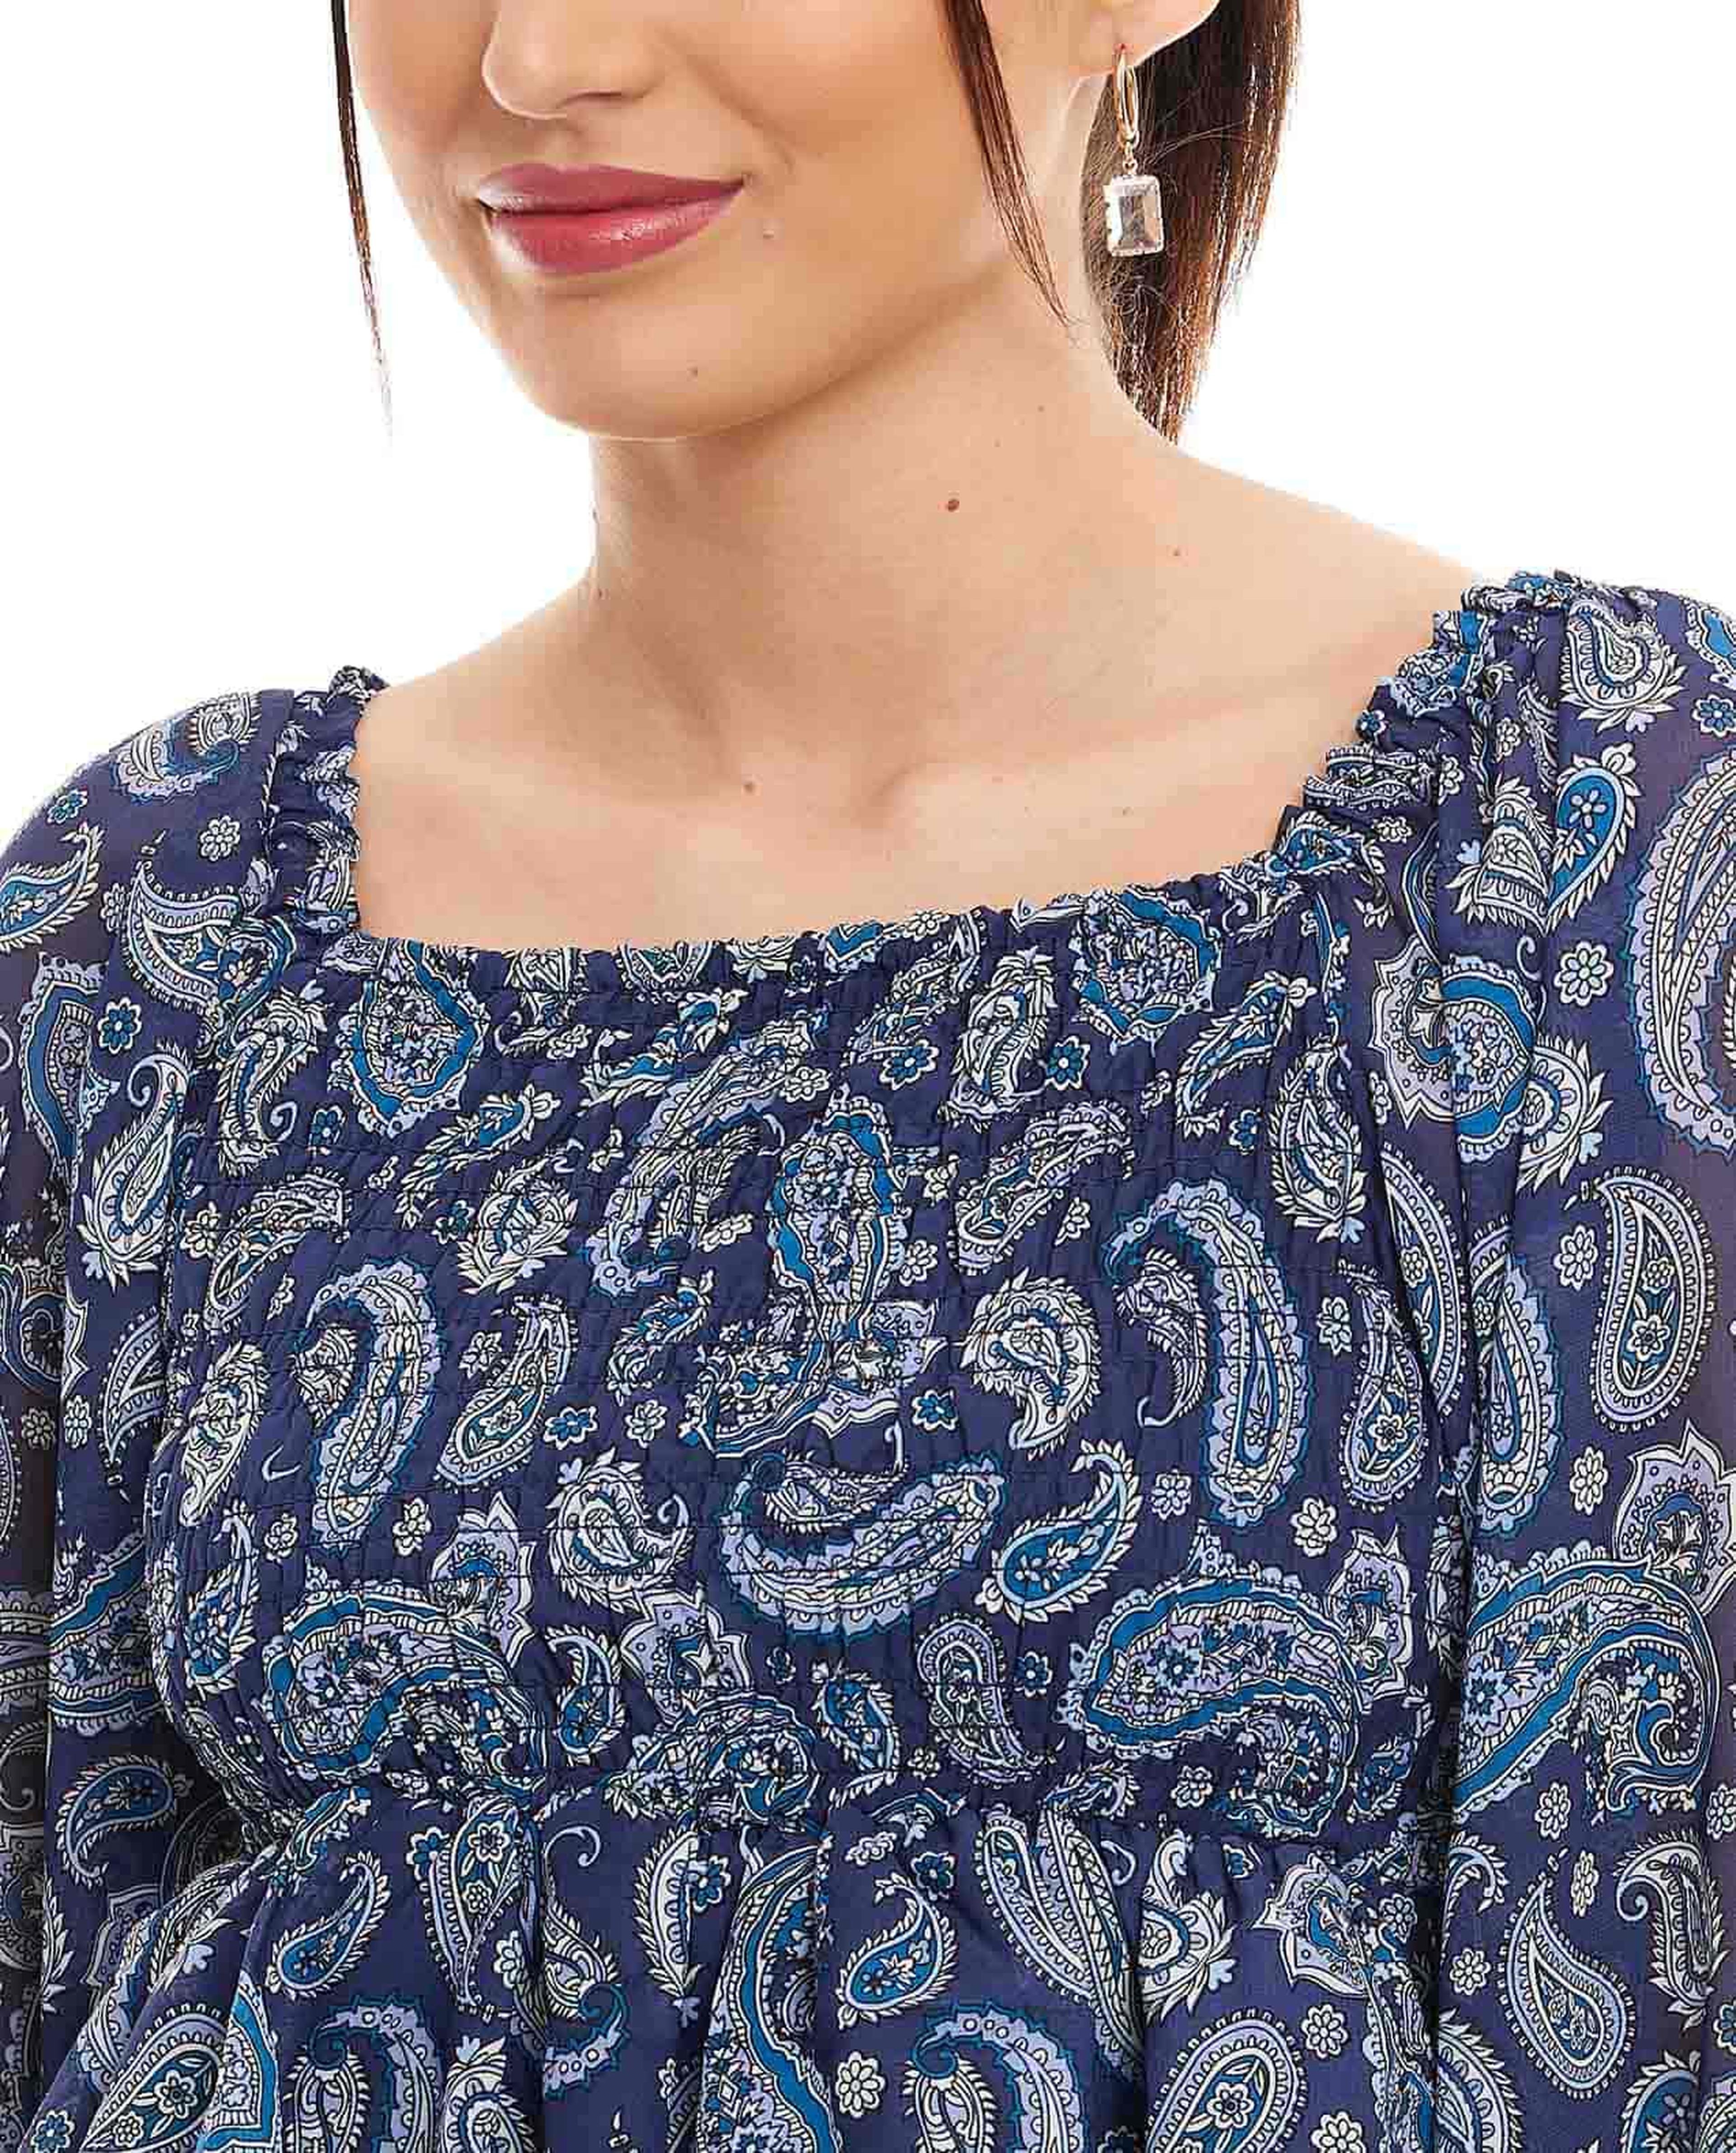 Floral Printed Top with Square Neck and Bishop Sleeves